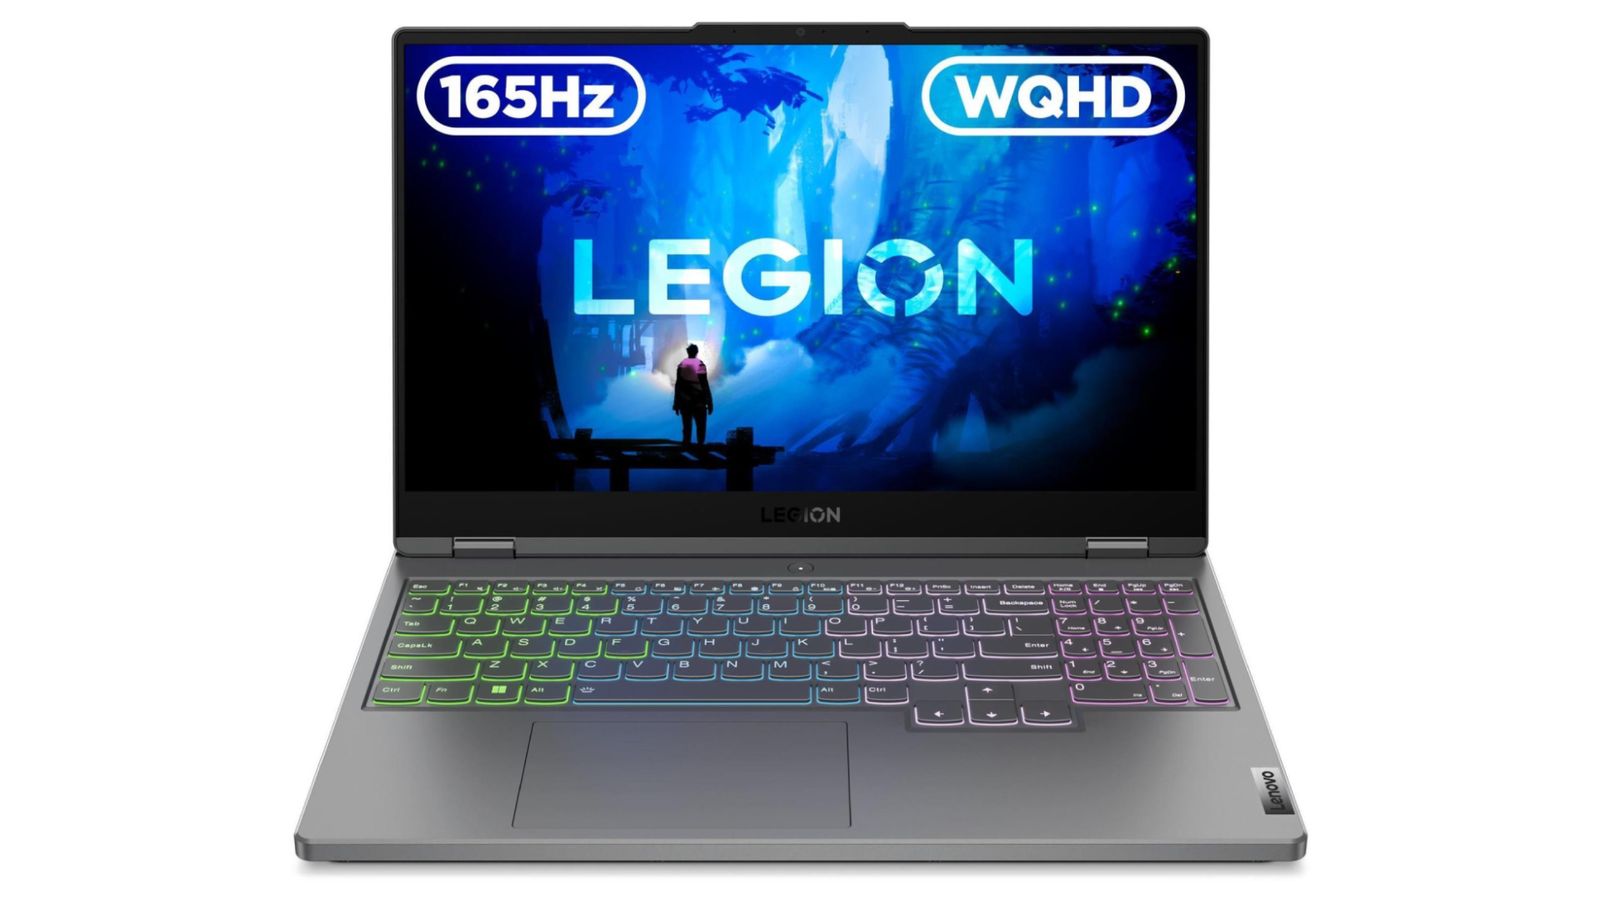 Best Lenovo gaming laptop - Lenovo Legion 5 product image of a light grey laptop with Legion branding in blue on the display and multi-coloured backlit keys.